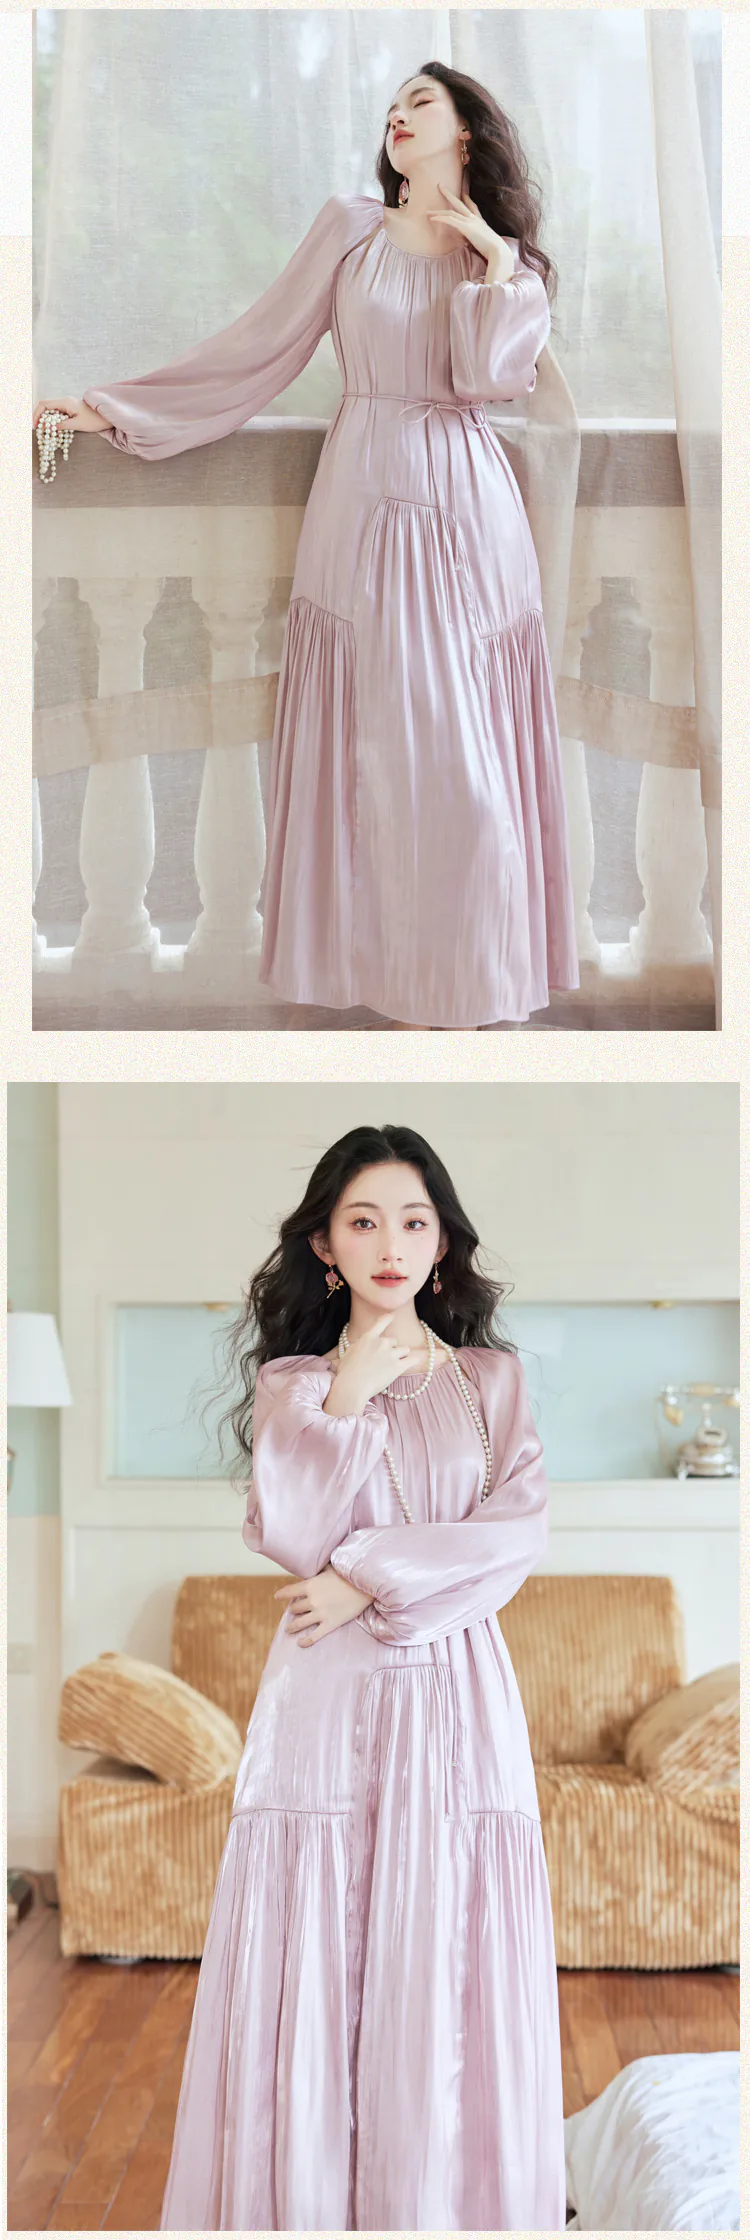 Sweet-French-Style-Round-Neck-Juliet-Sleeve-Morning-Robe-Casual-Dress15